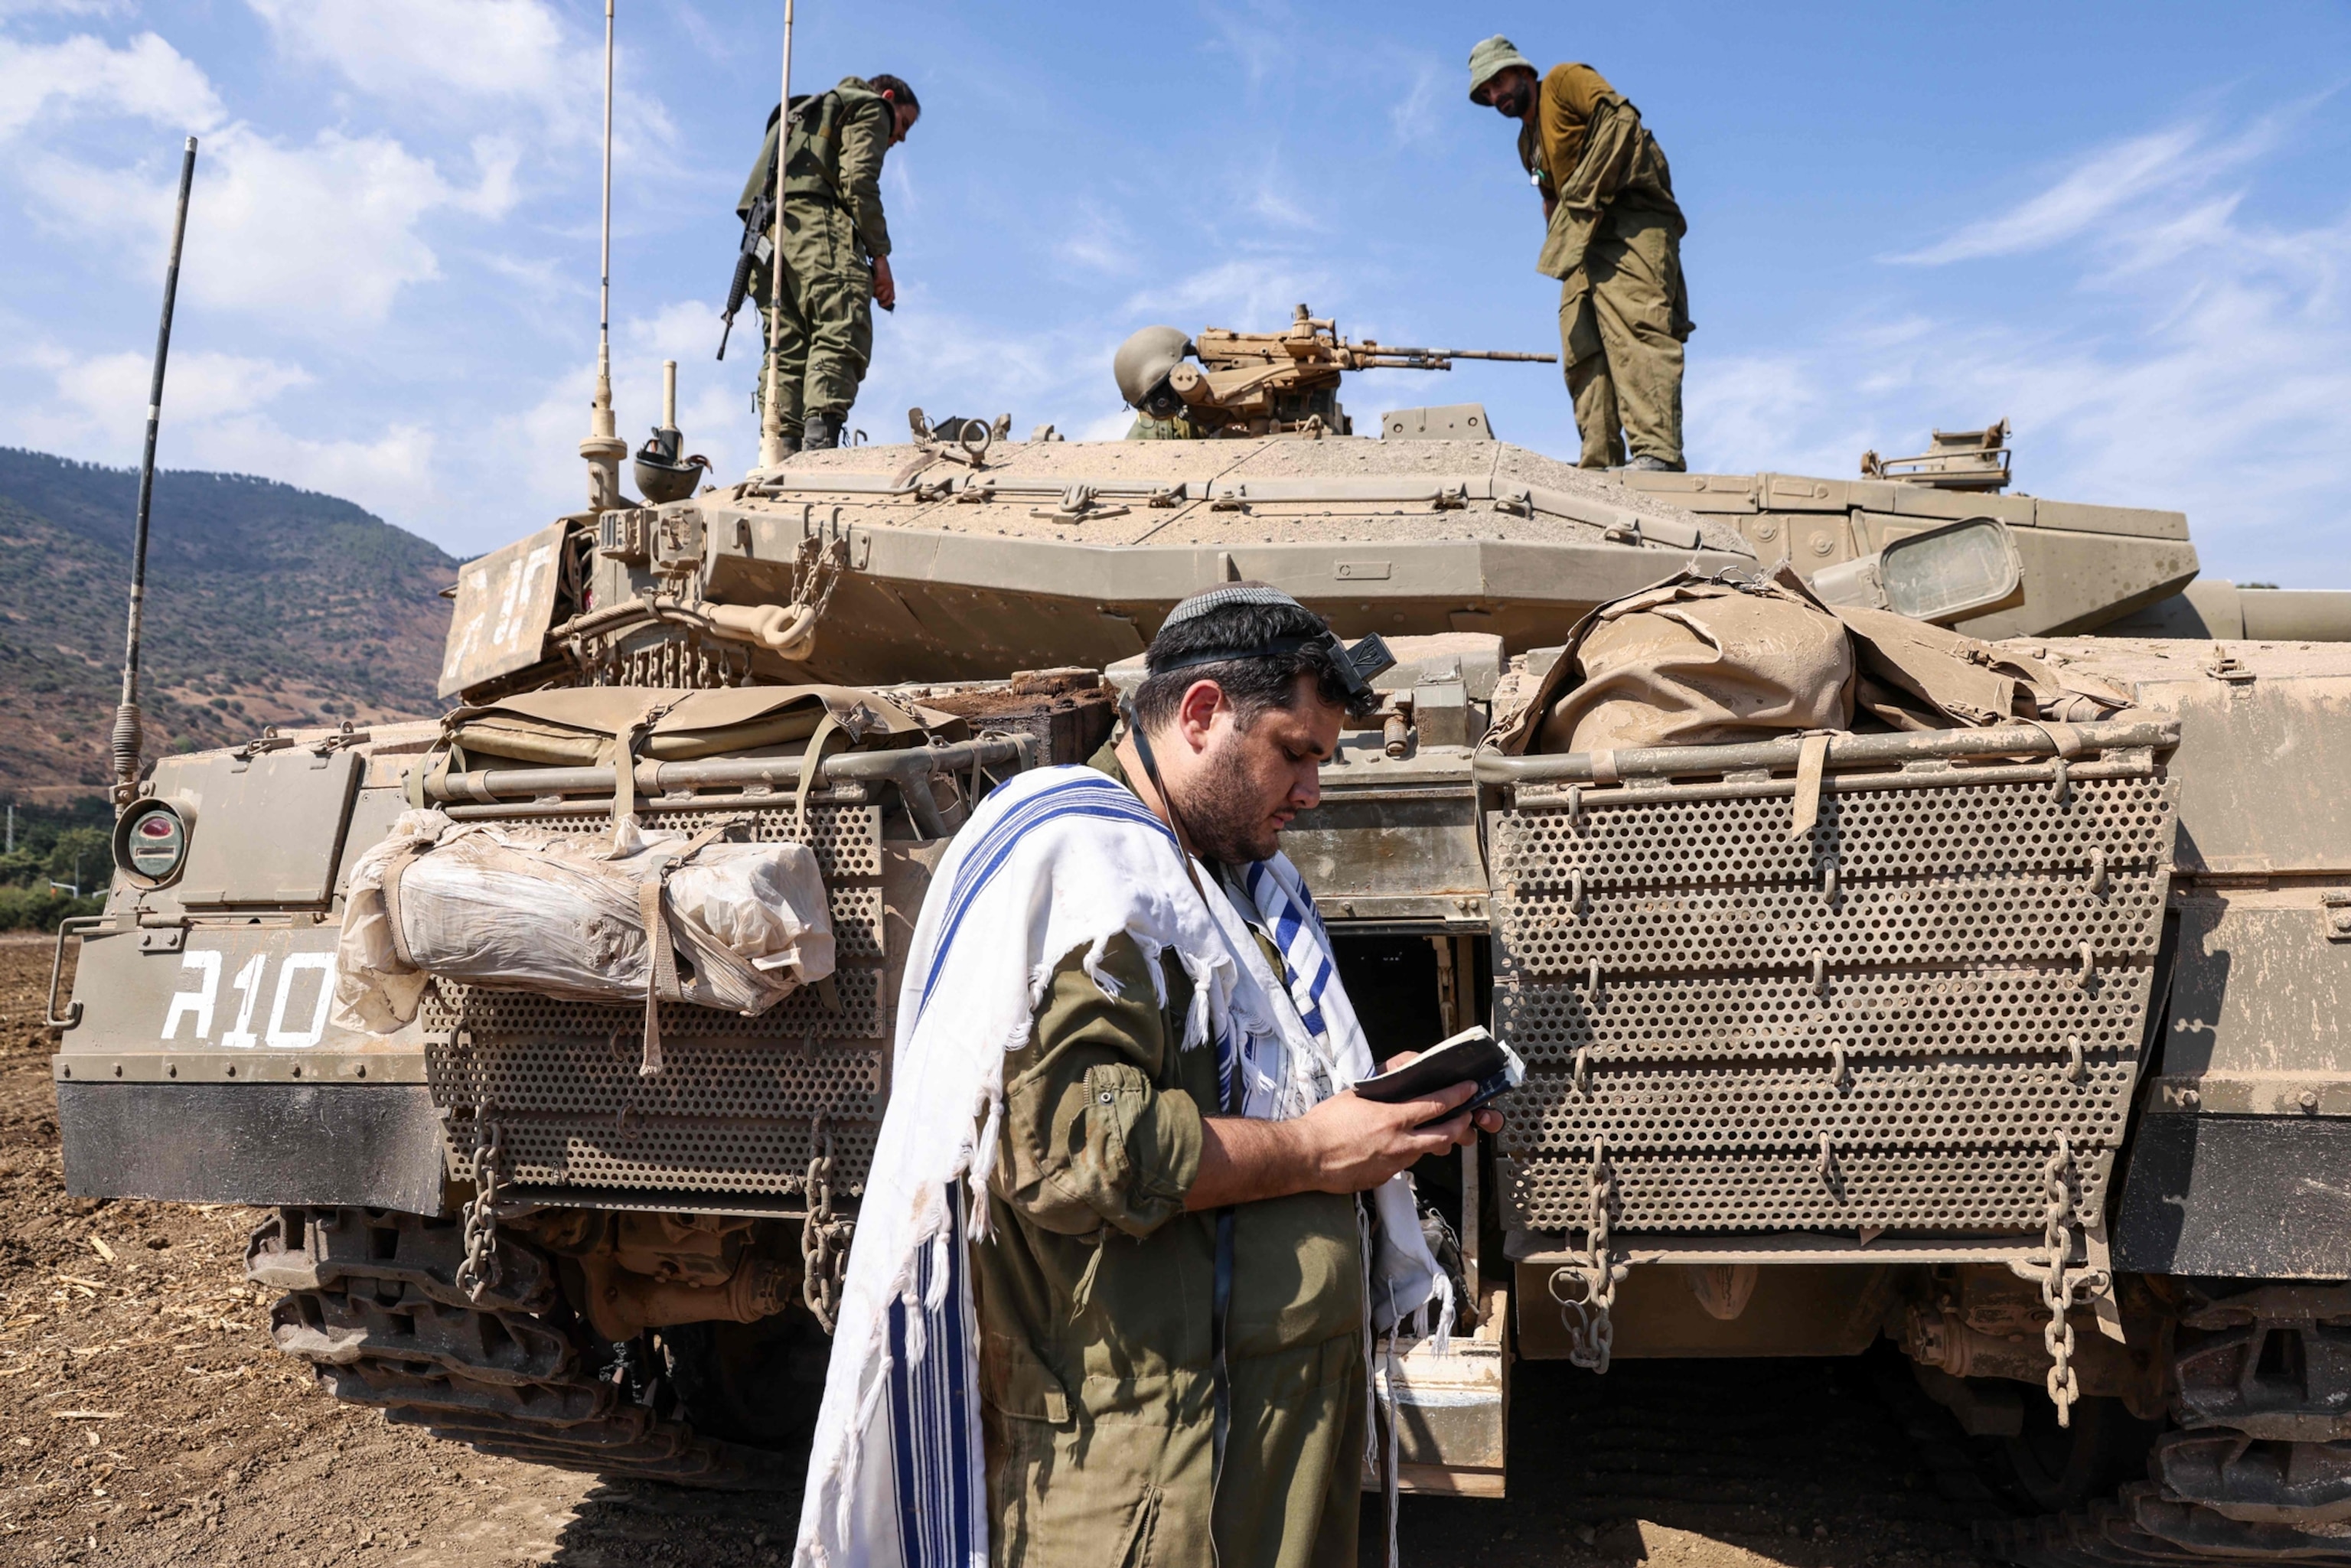 PHOTO: An Israeli sodleir prays standing in front of a Merkava tank on the outskirts of the northern town of Kiryat Shmona near the border with Lebanon on Oct. 8, 2023.